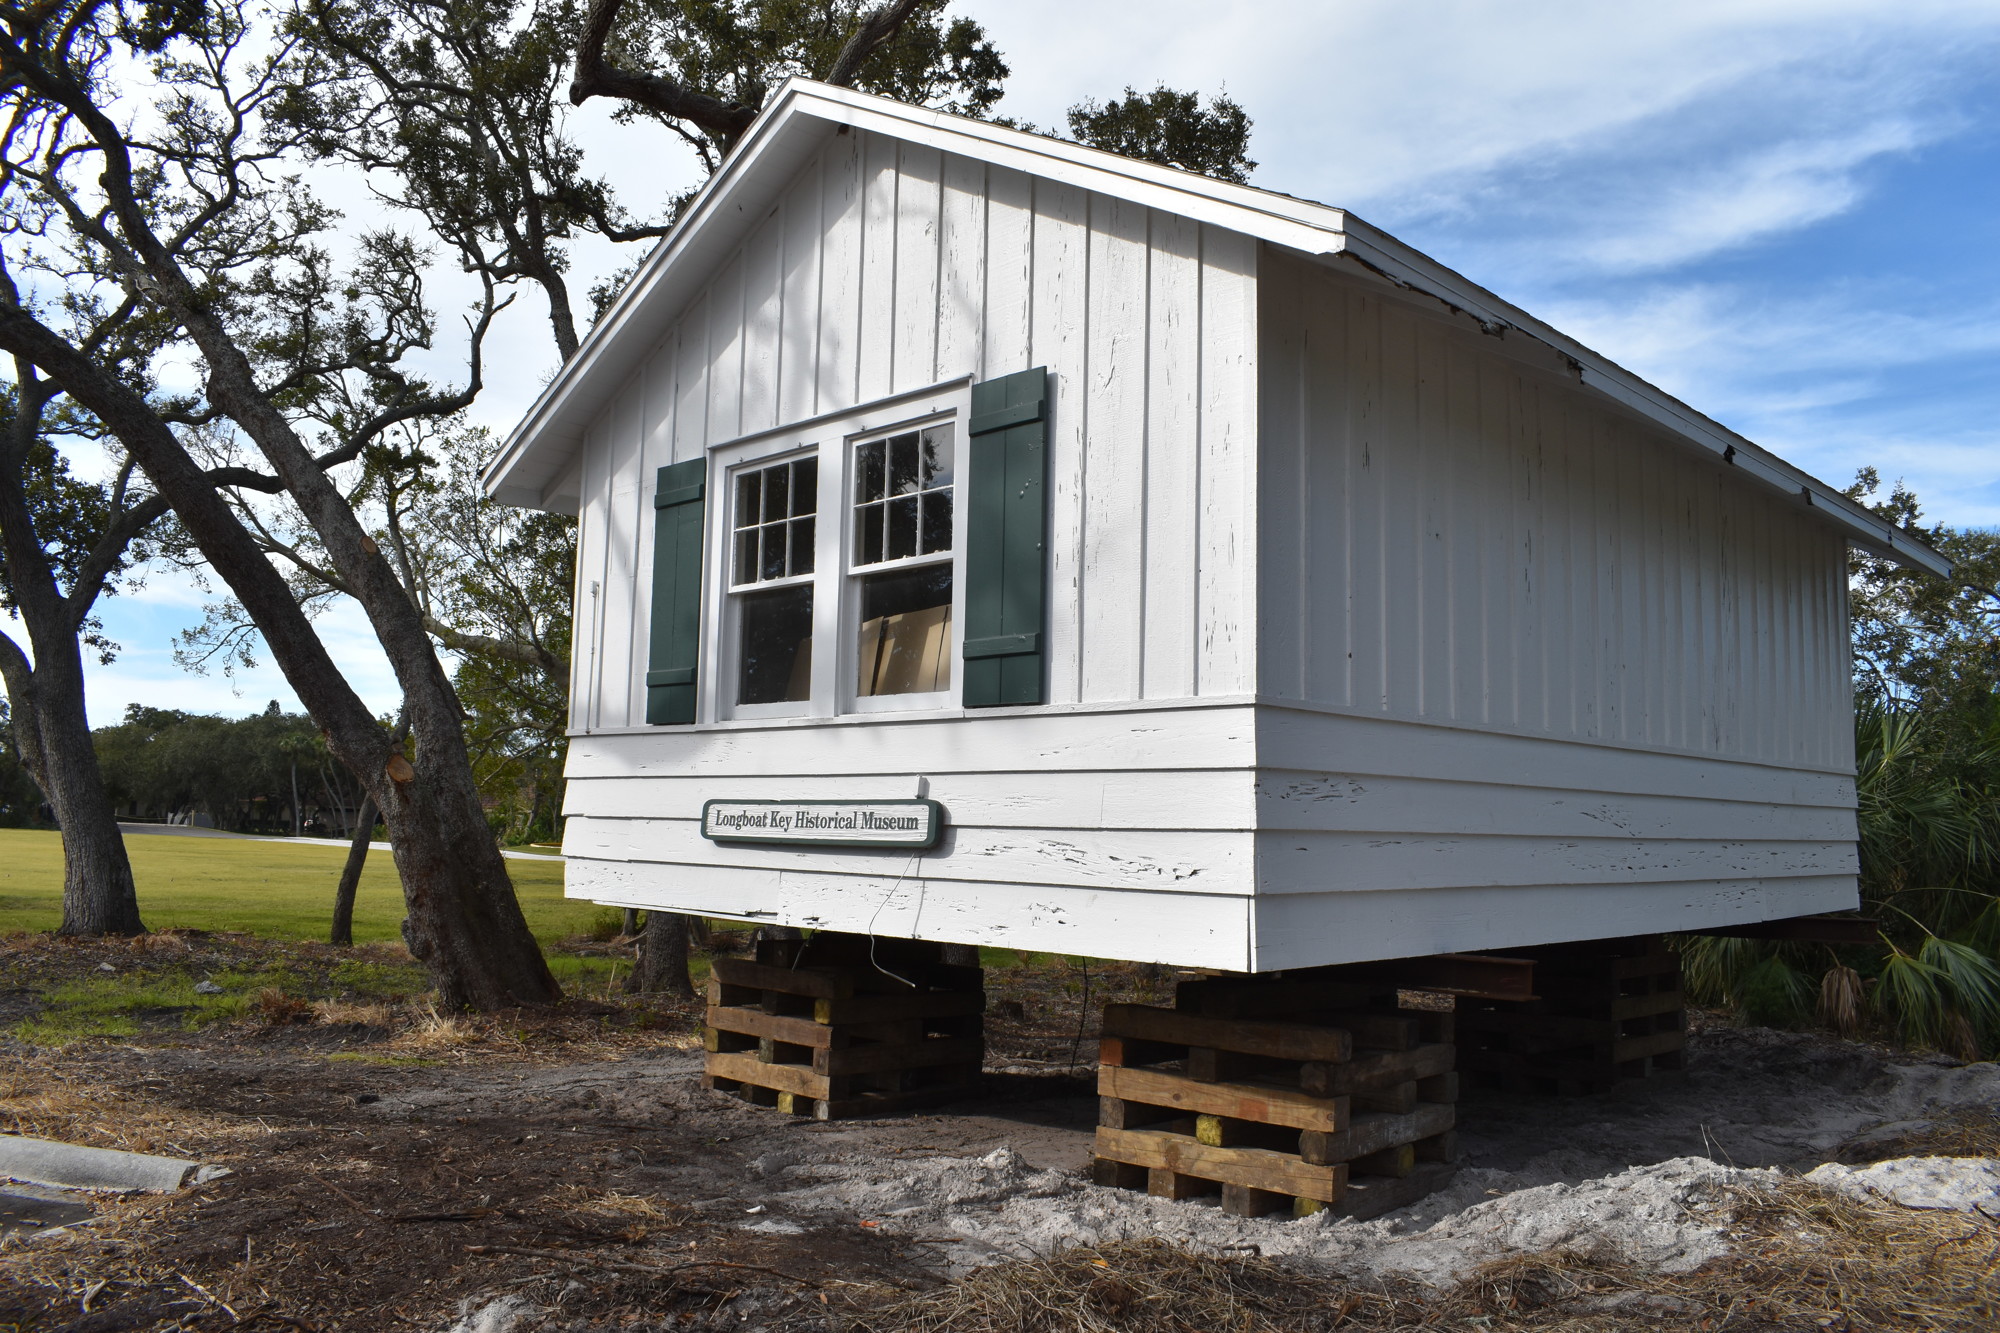 In January, the Longboat Key Historical Society moved its historic cottage to the northeast part of the Town Center site.